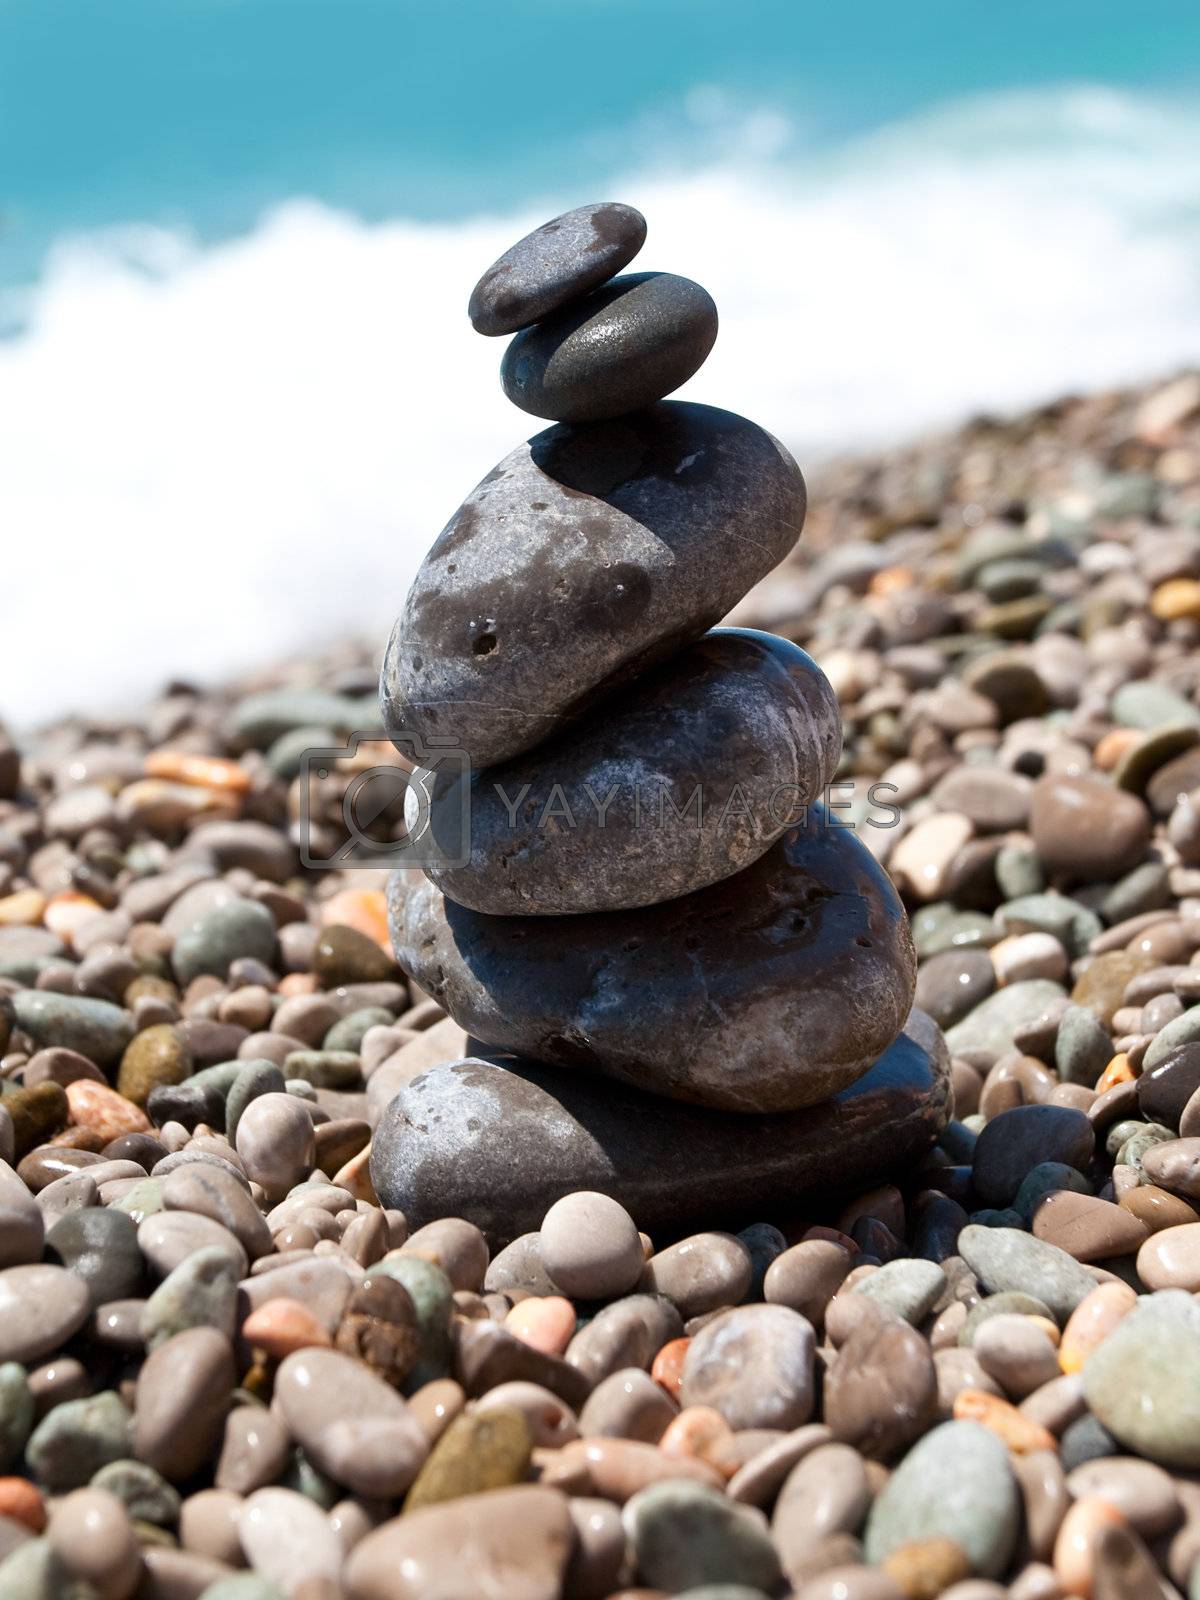 Royalty free image of pile of pebble stones by Alekcey